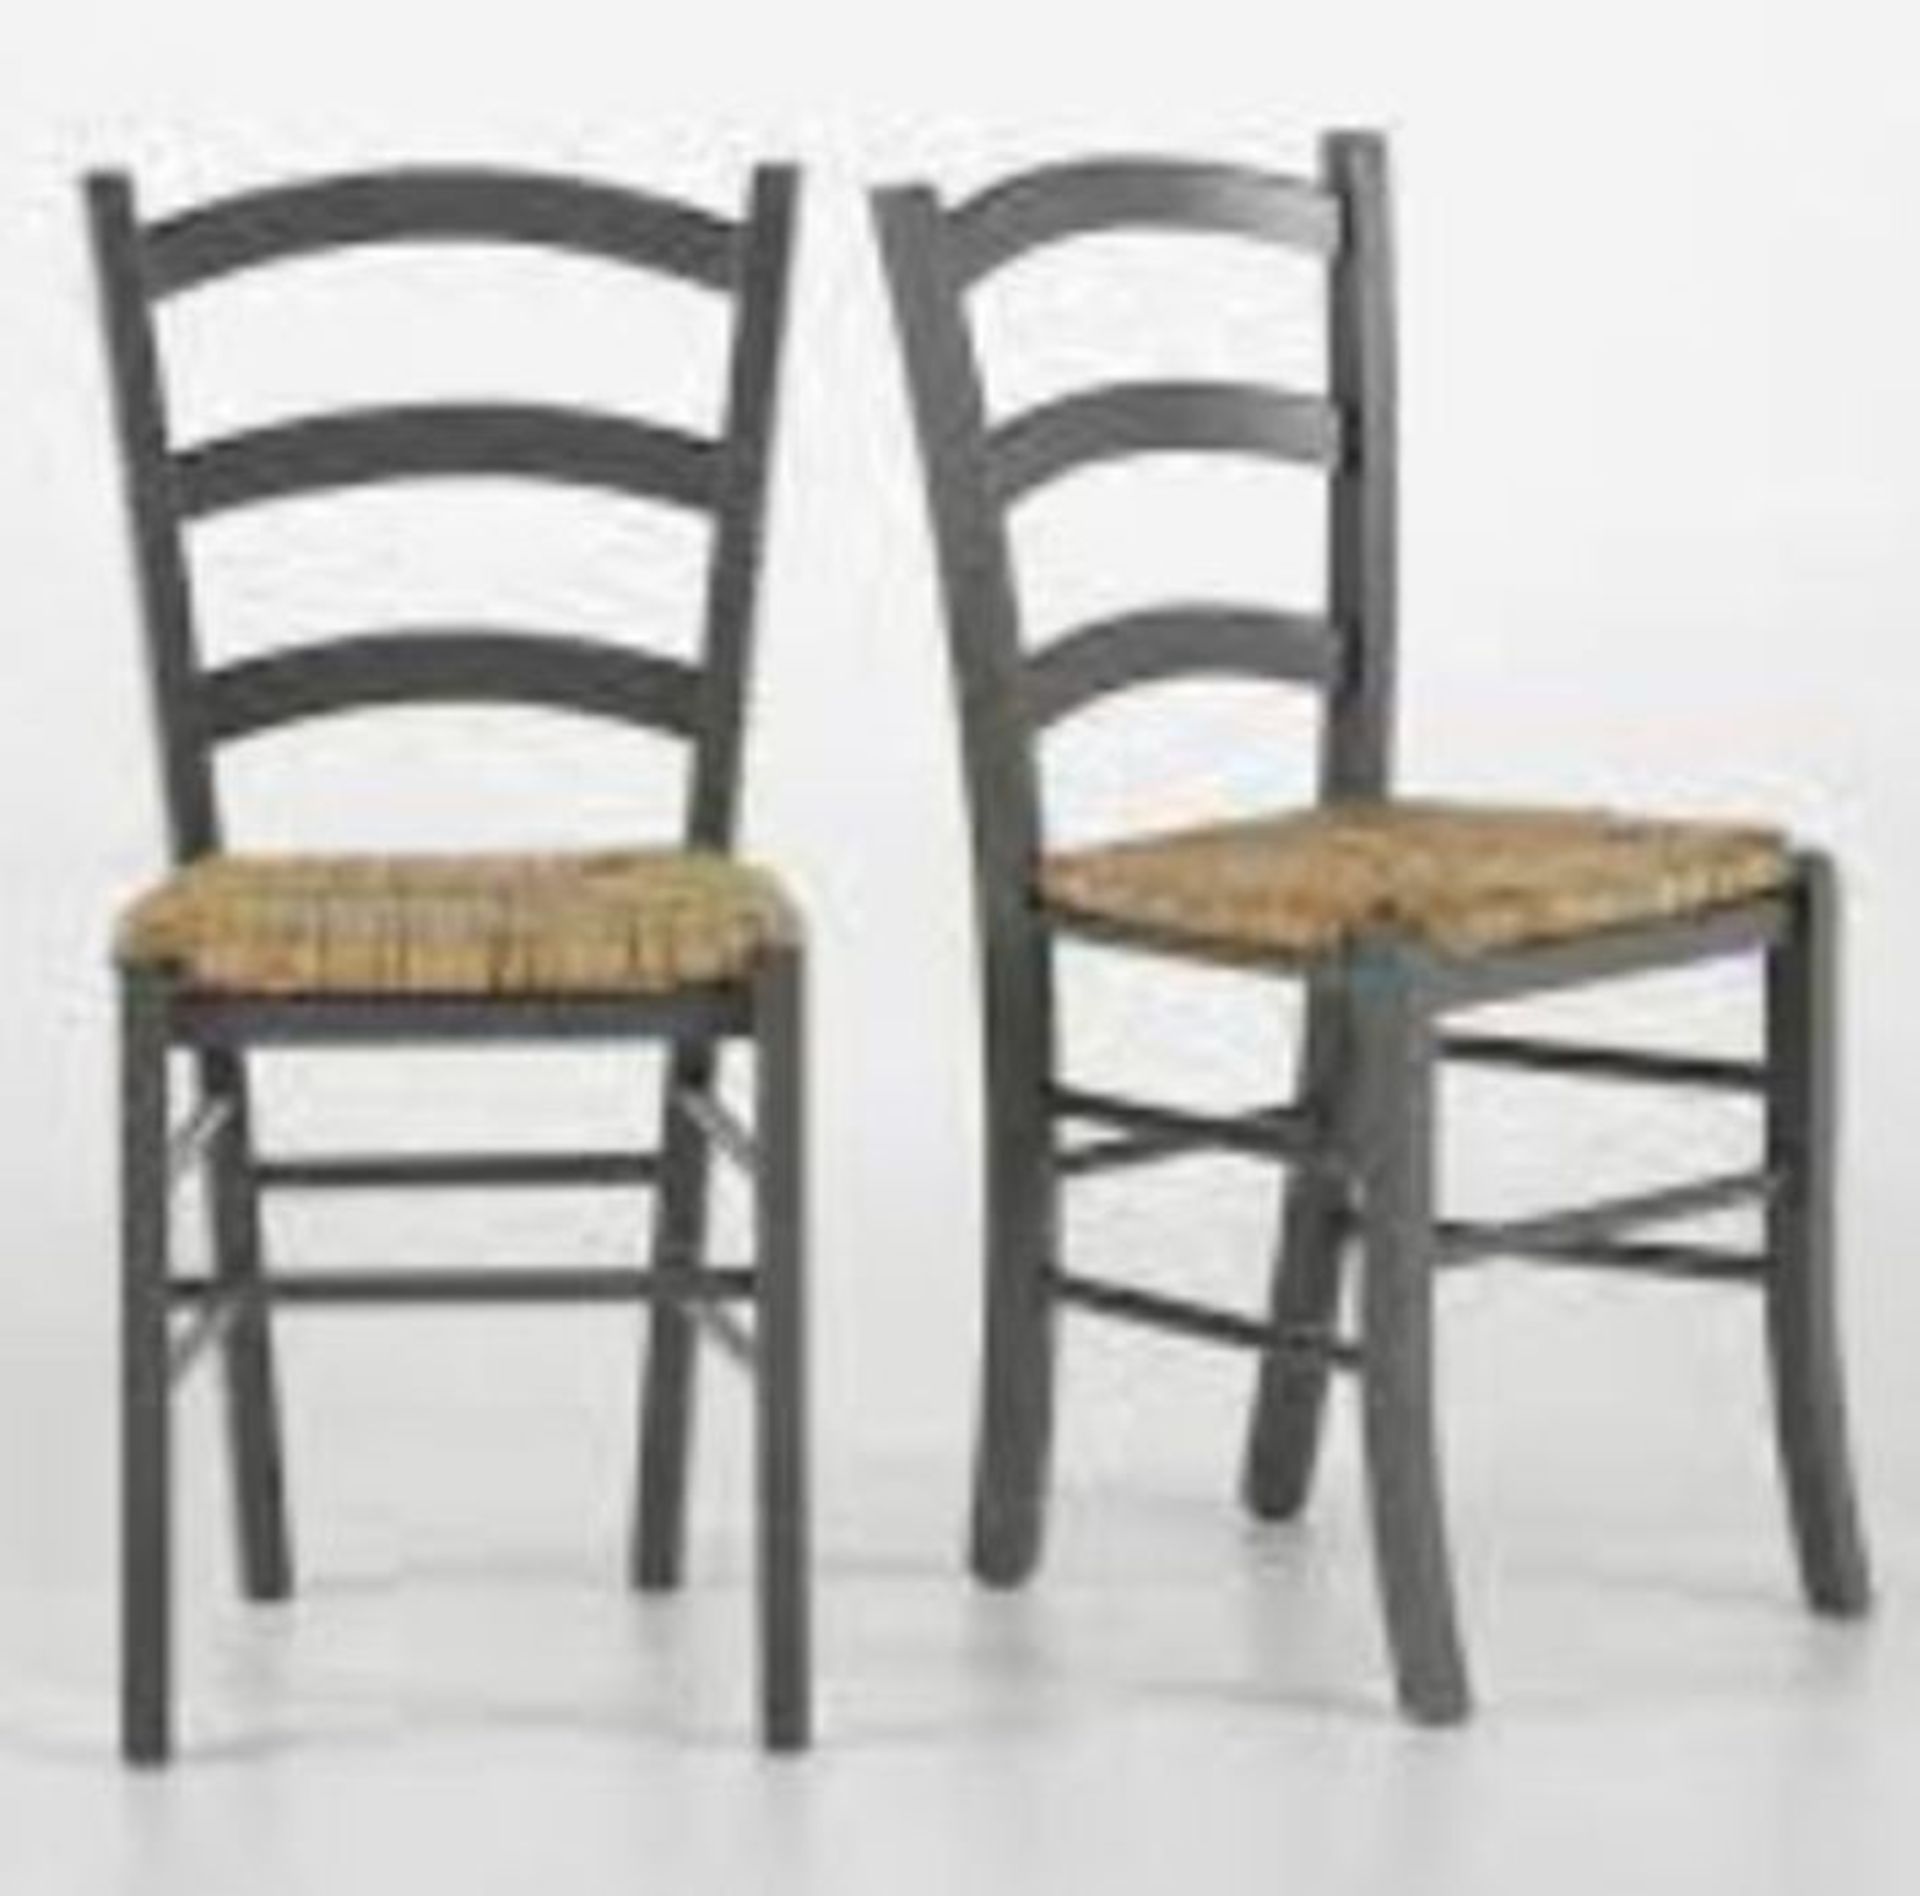 SET OF 2 PERRINE COUNTRY-STYLE CHAIRS / RRP £99.00 / CUSTOMER RETURN GRADE A/B MINOR PAINT DAMAGE